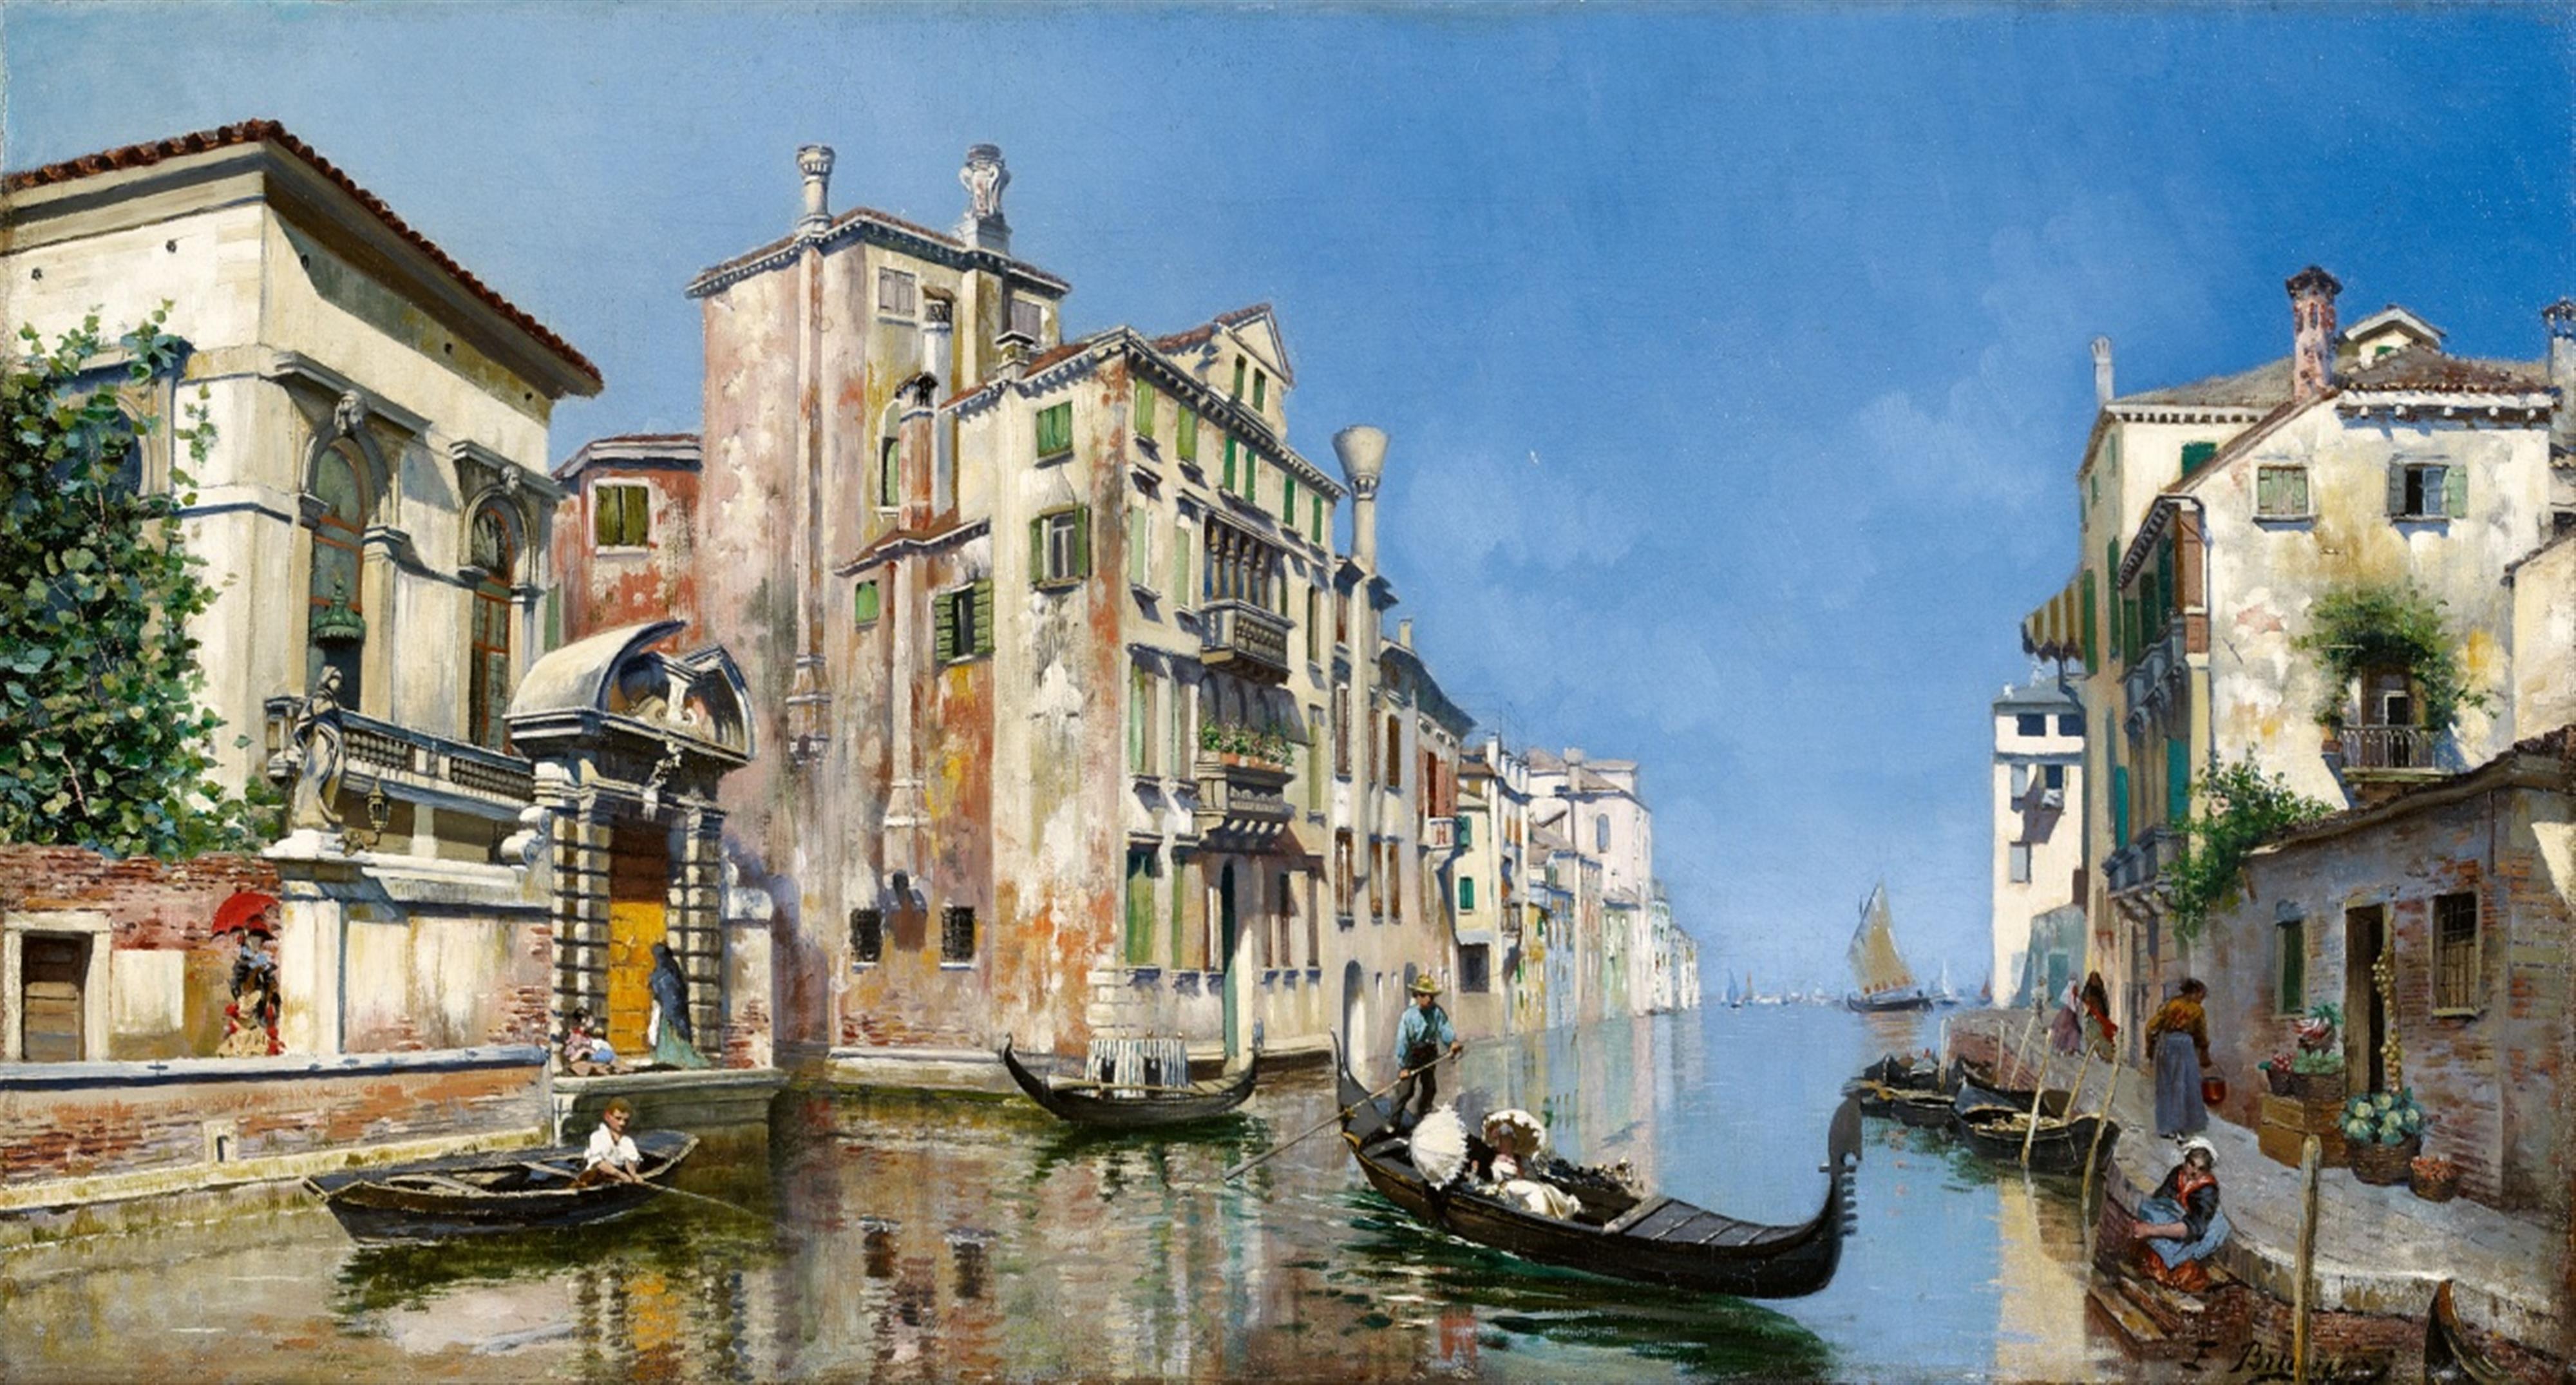 Francesco Bruneri (Francesco Brunery (Bruneri)) - View of a Venetian Canal - image-1